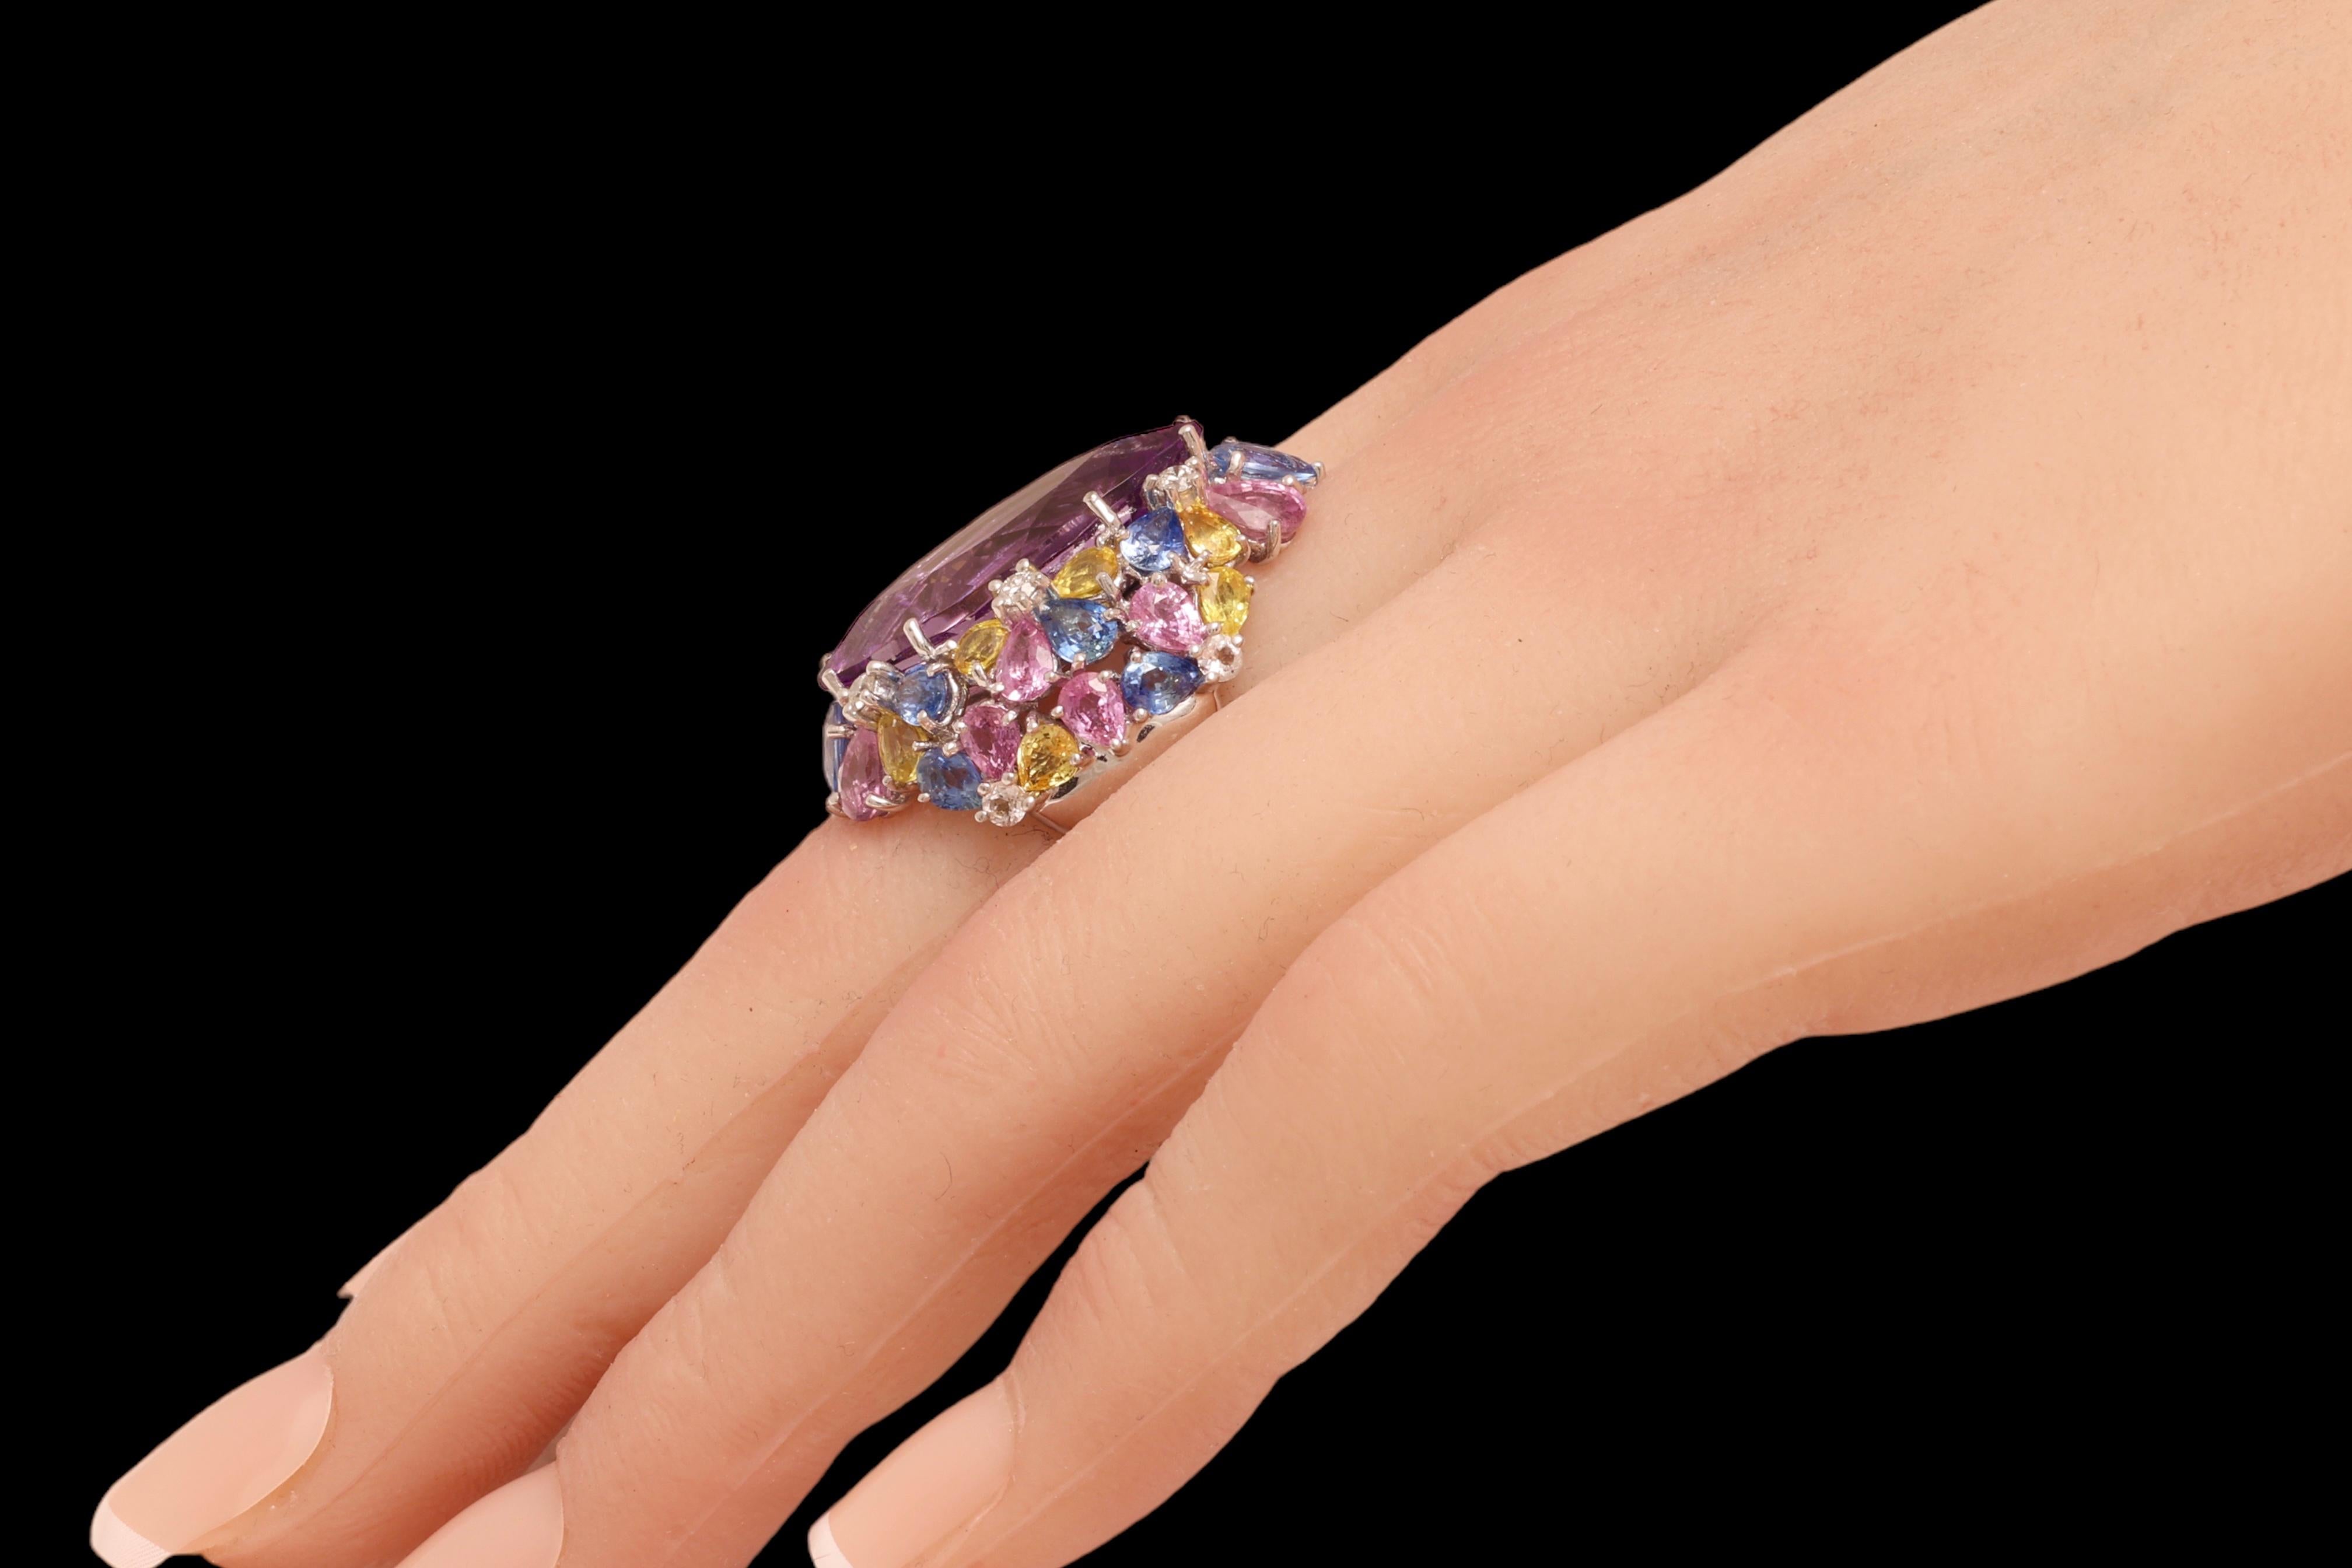 18kt White Gold Ring Big Amethyst Center Stone & Blue, Pink Sapphires, Diamonds  For Sale 4